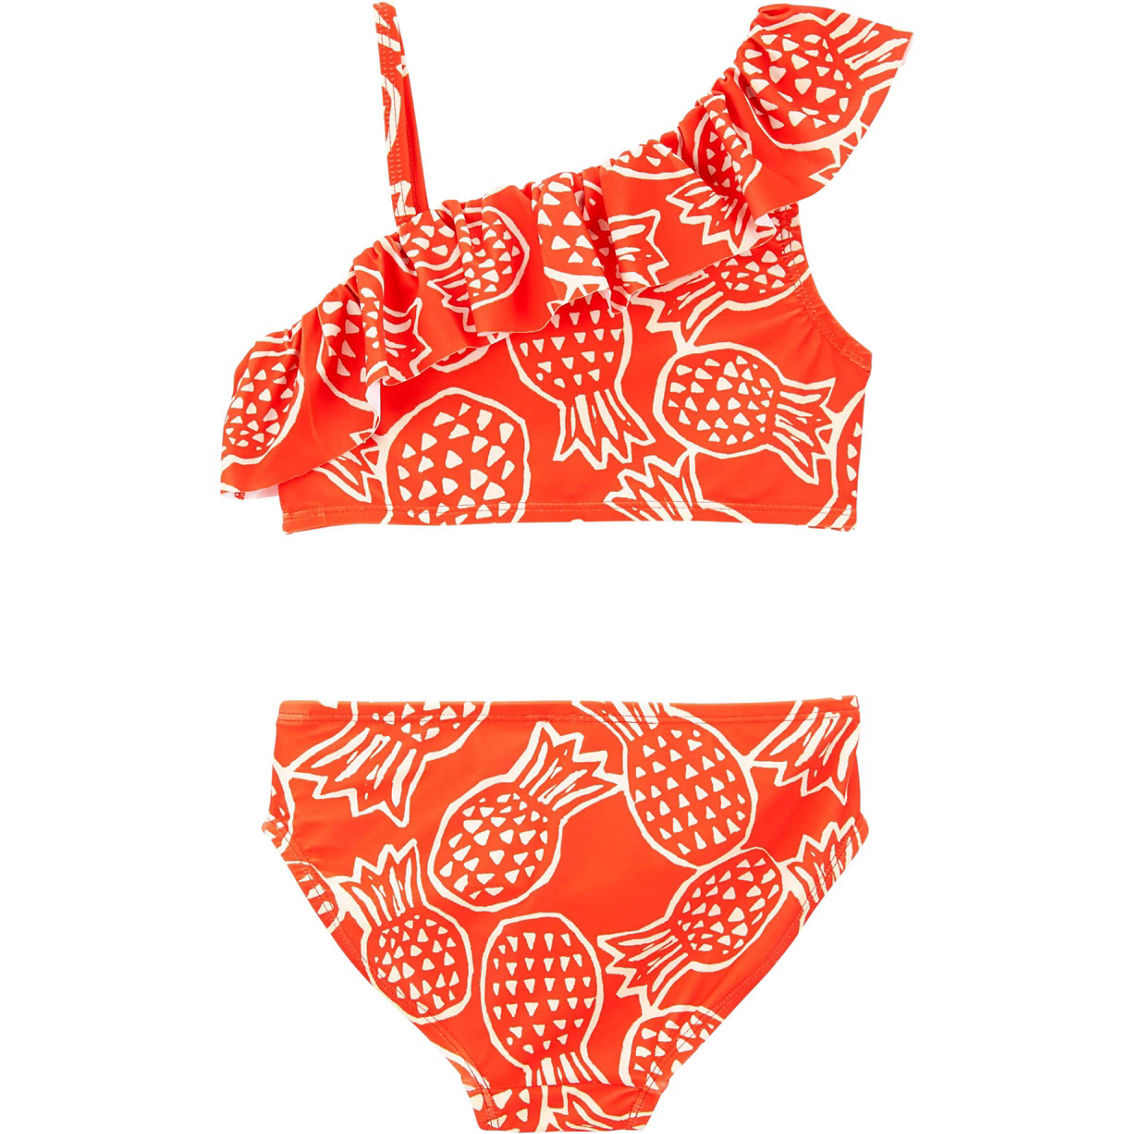 Carter's Girls One Shoulder Pineapple Tankini Top and Bottoms 2 pc. Swimsuit Set - Image 2 of 3